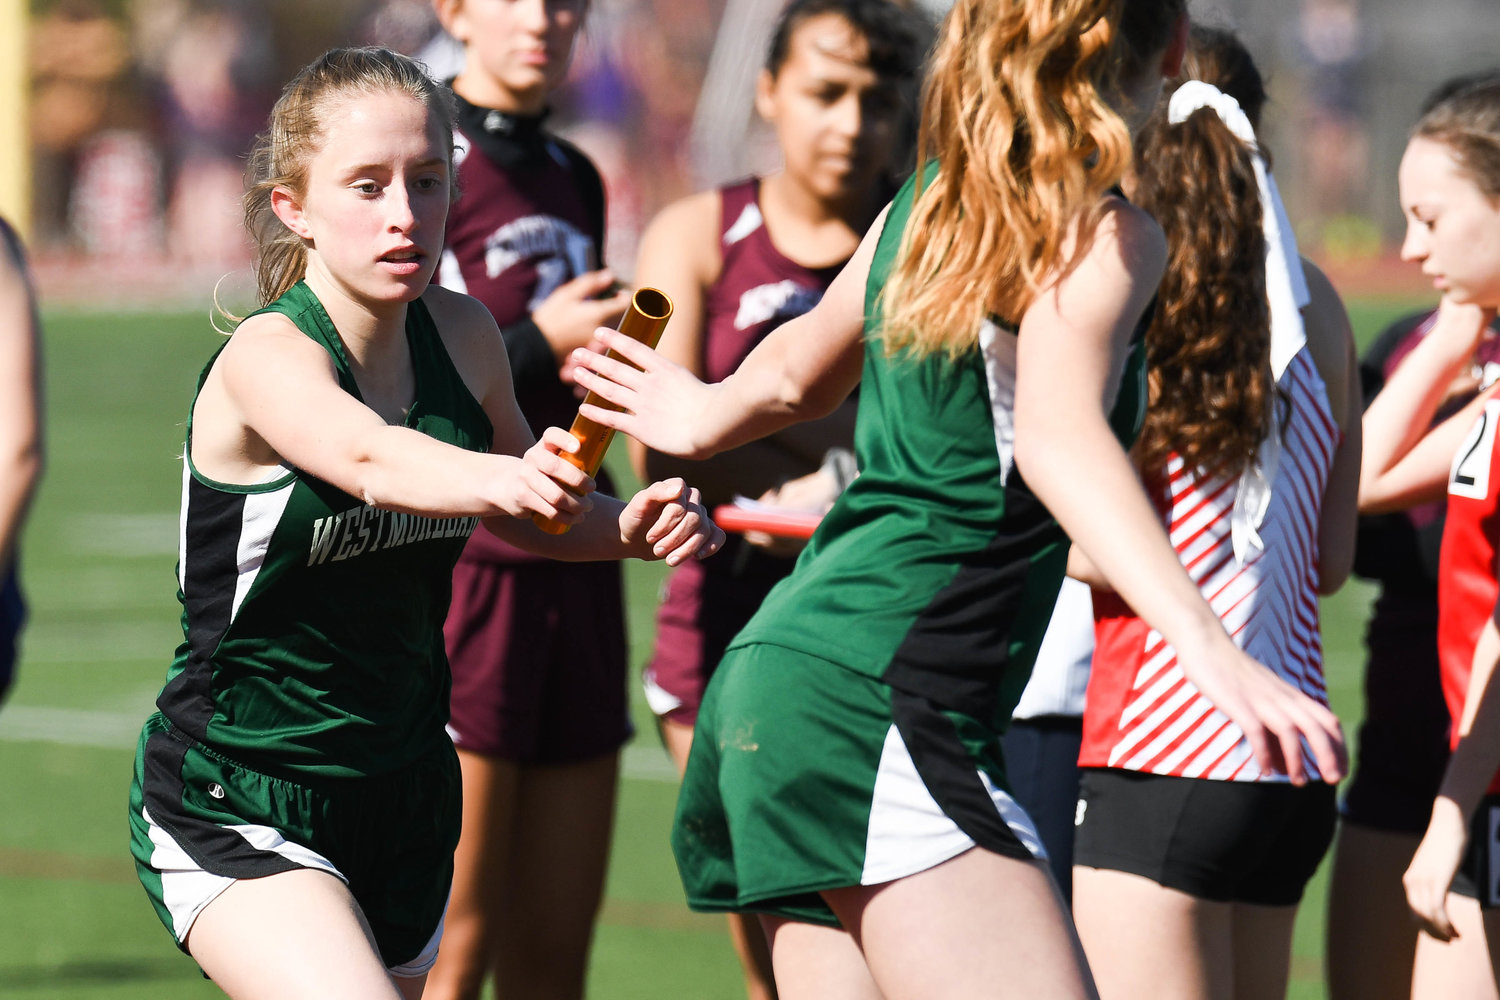 Westmoreland's Tessie Shafer, left, hands a baton off to teammate Emily Gubbins during the Cahill Classic on Friday at Sauquoit Valley High School.